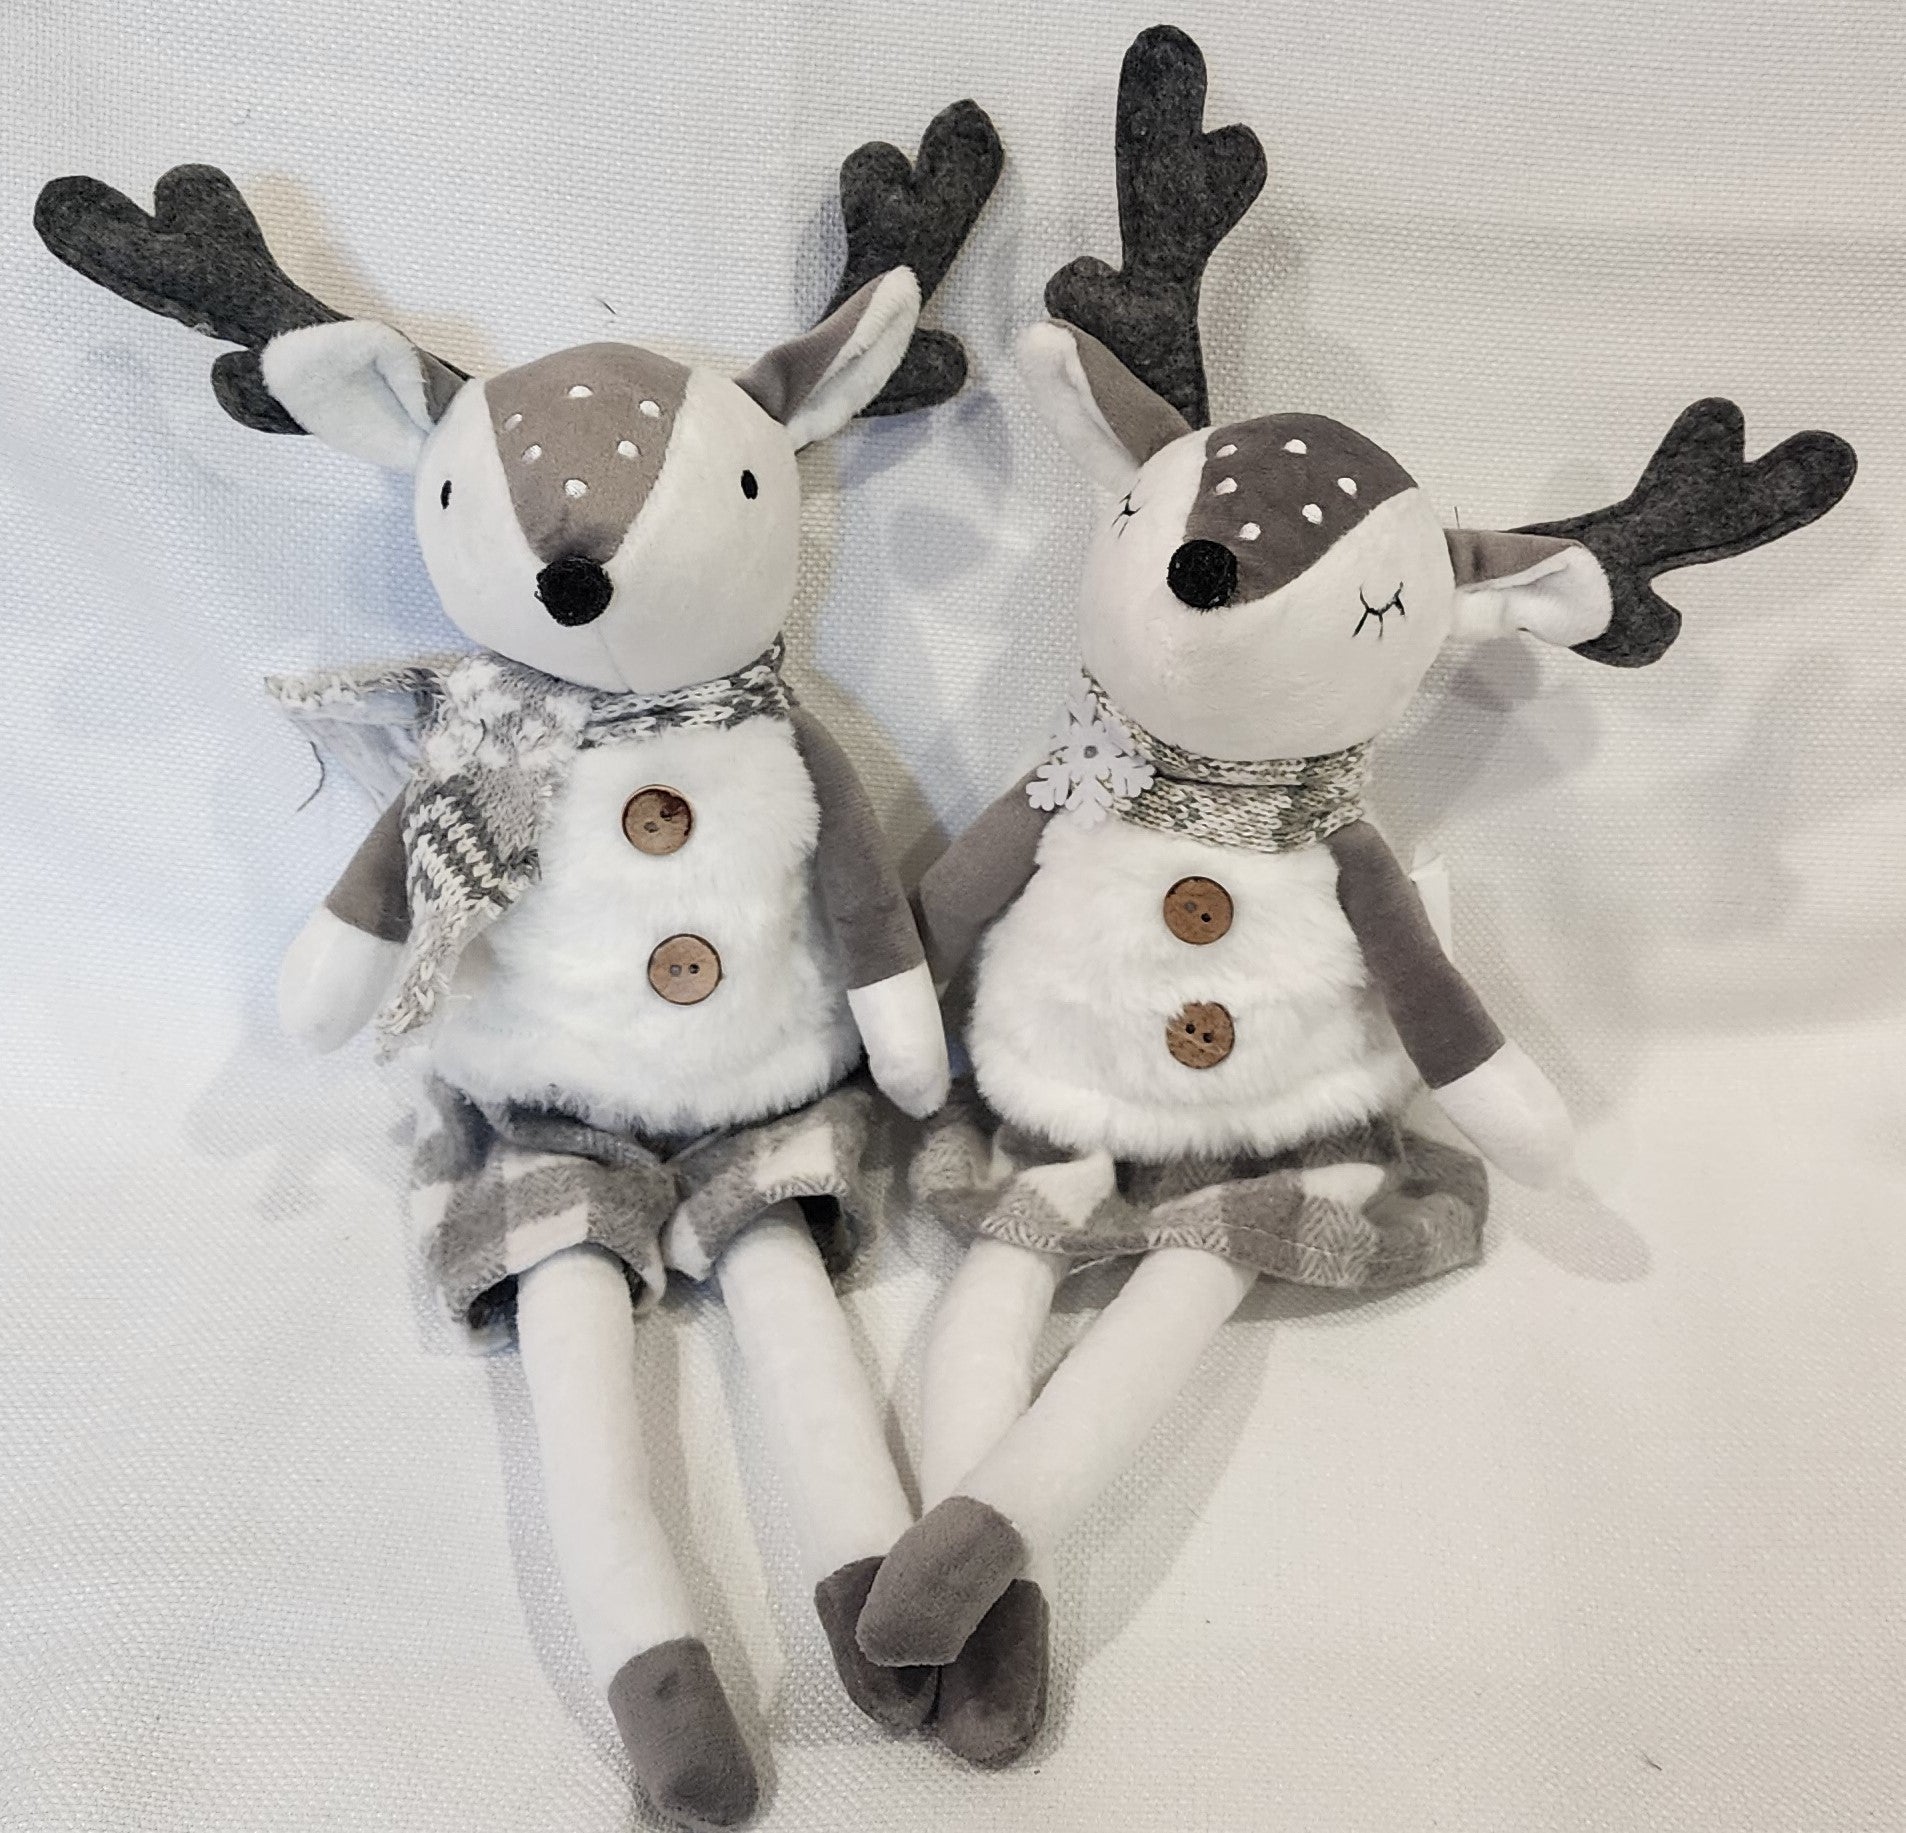 13" Plush Sitting Reindeer Man and Woman, 2 Assorted